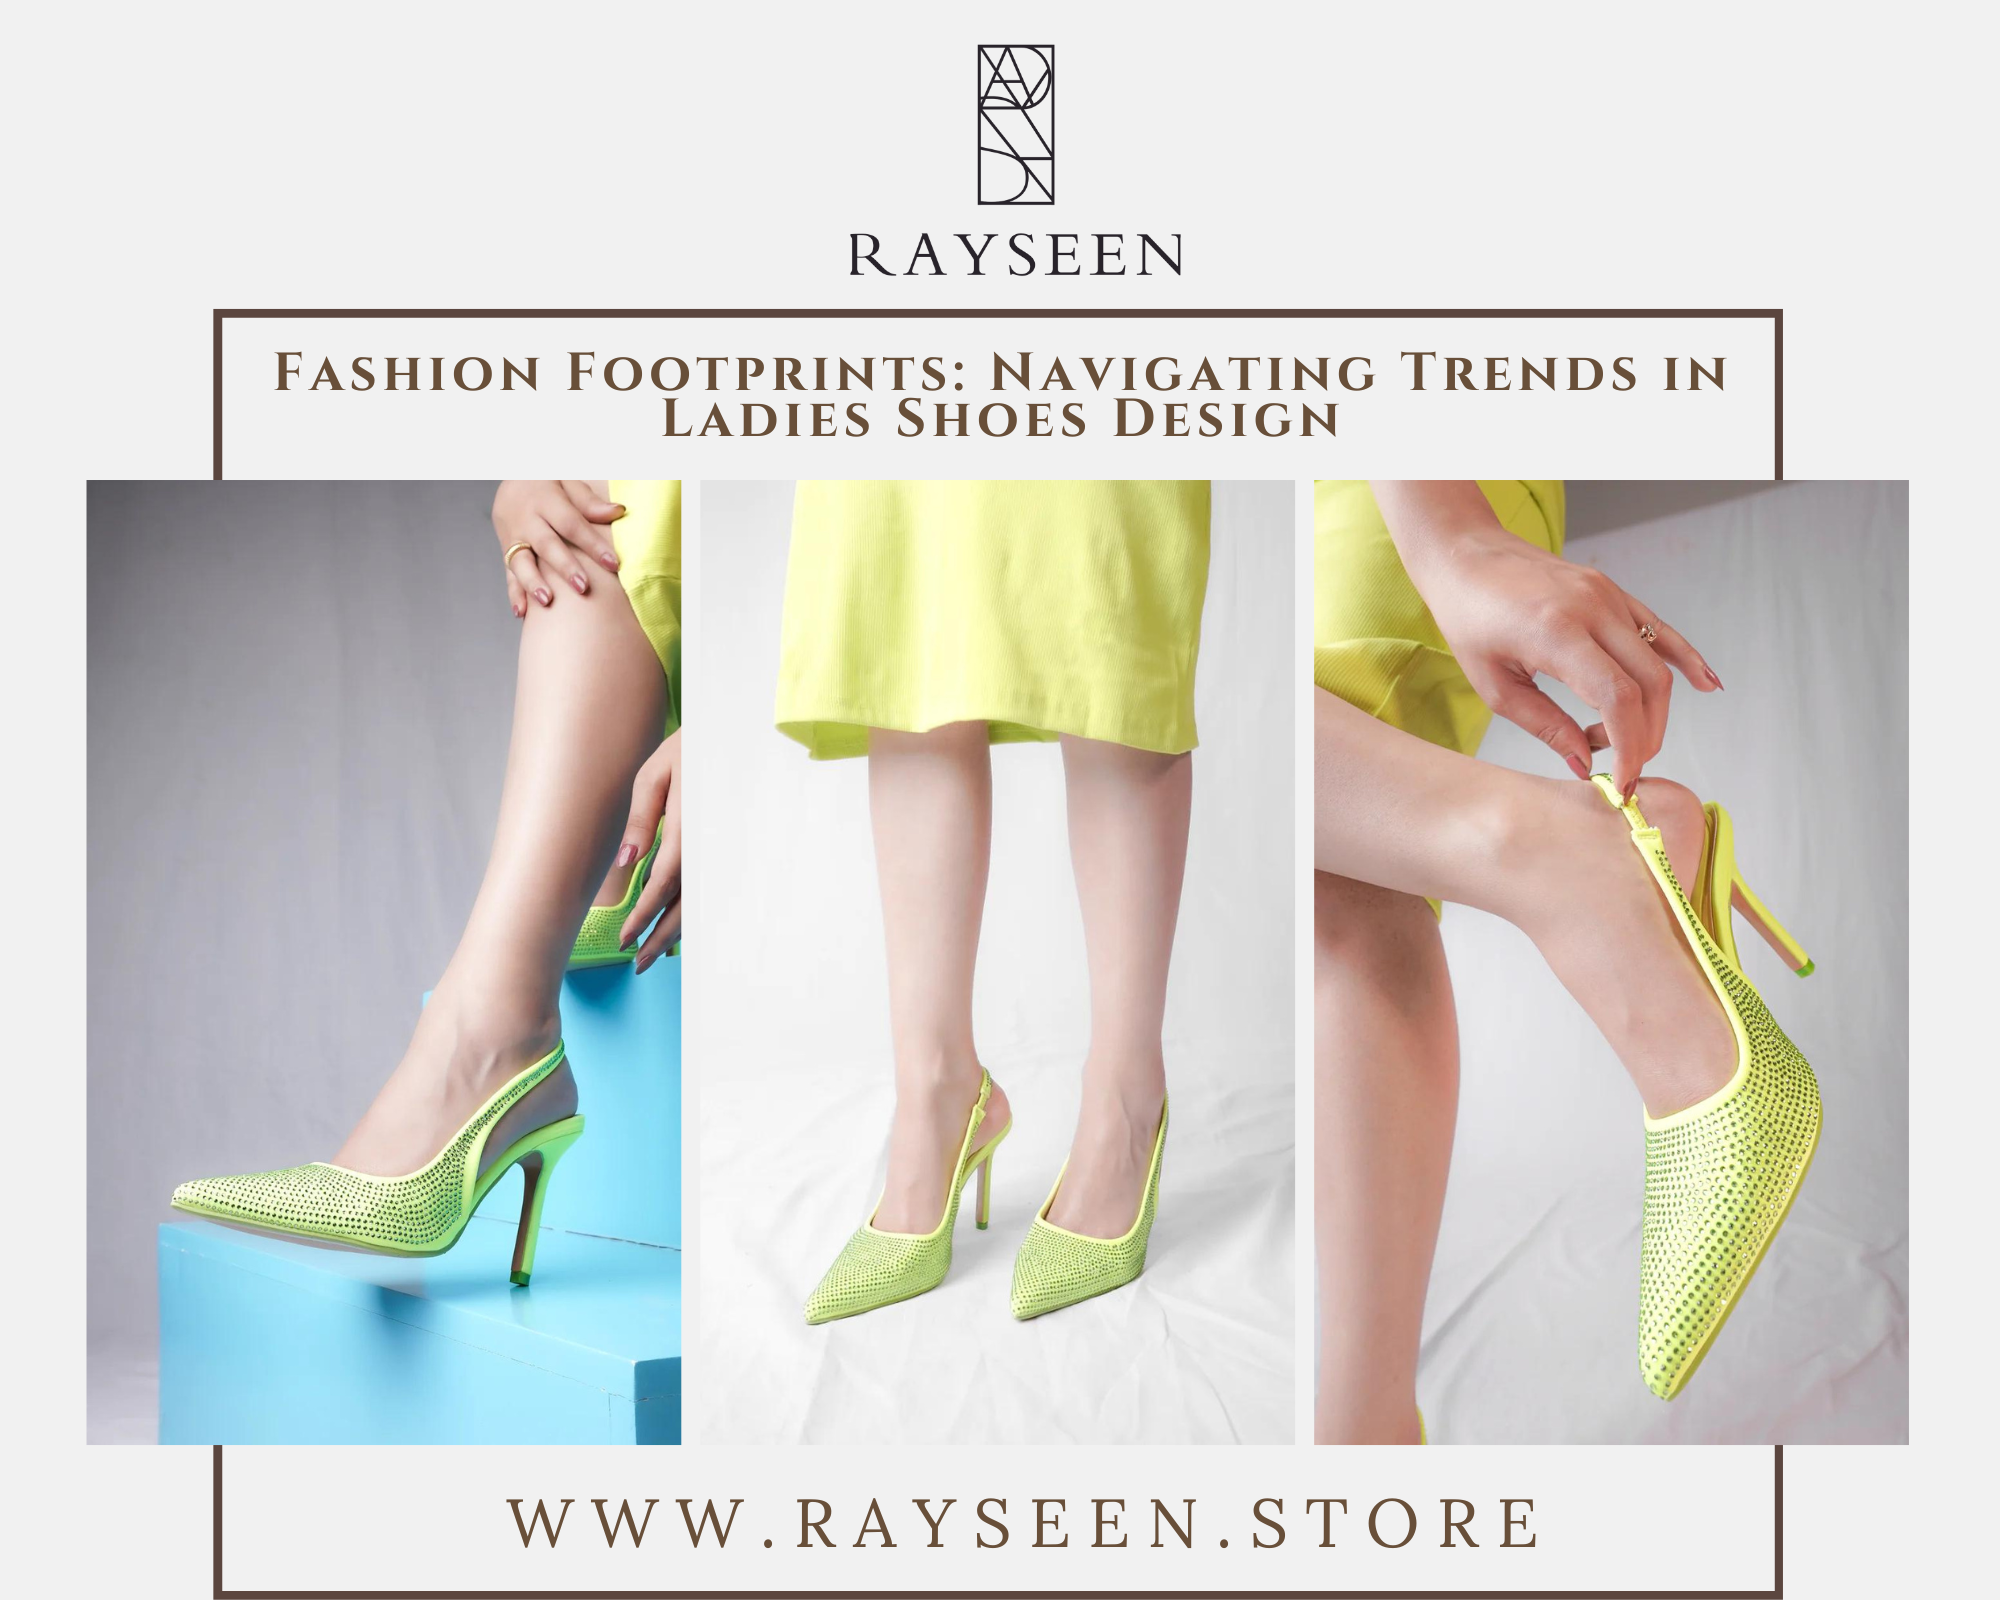 Fashion Footprints: Navigating Trends in Ladies Shoes Design